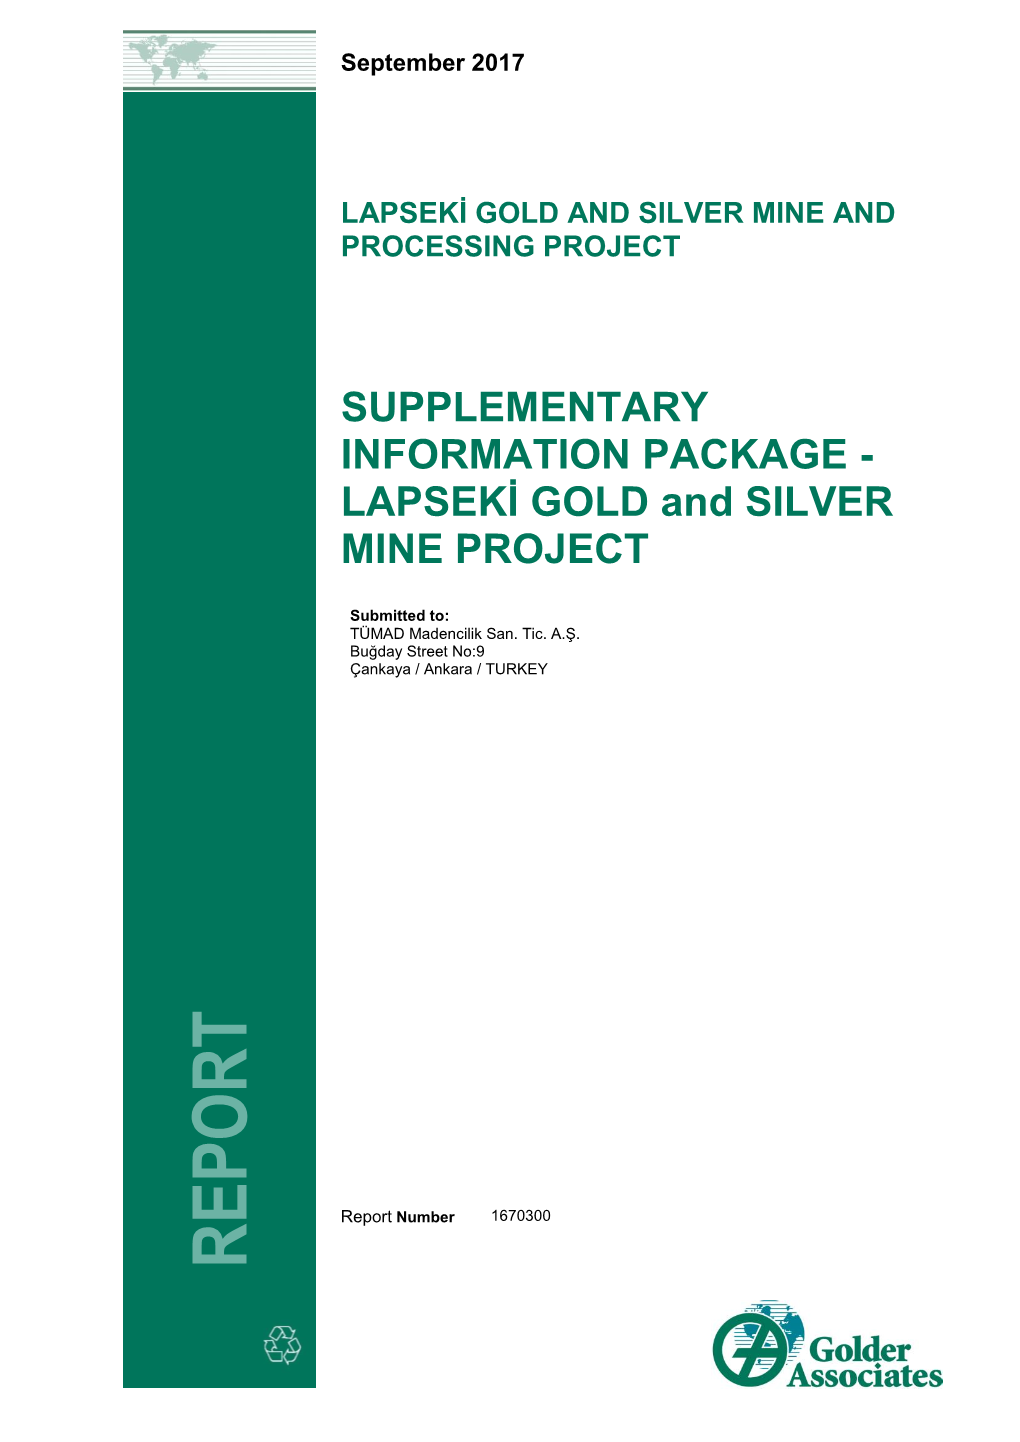 LAPSEKİ GOLD and SILVER MINE PROJECT REPOR T